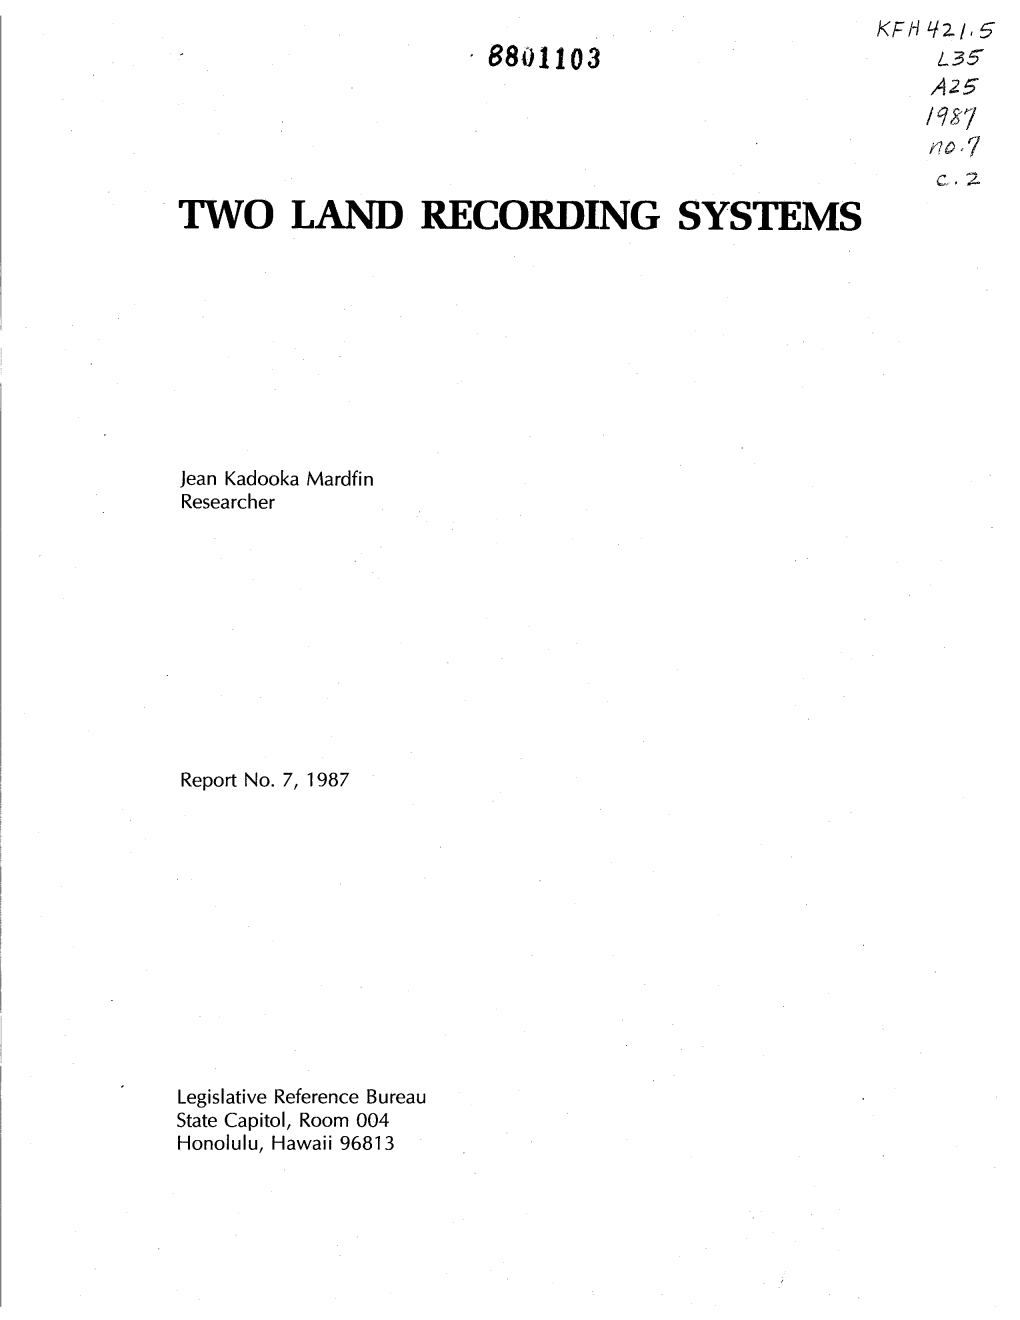 Two Land Recording Systems